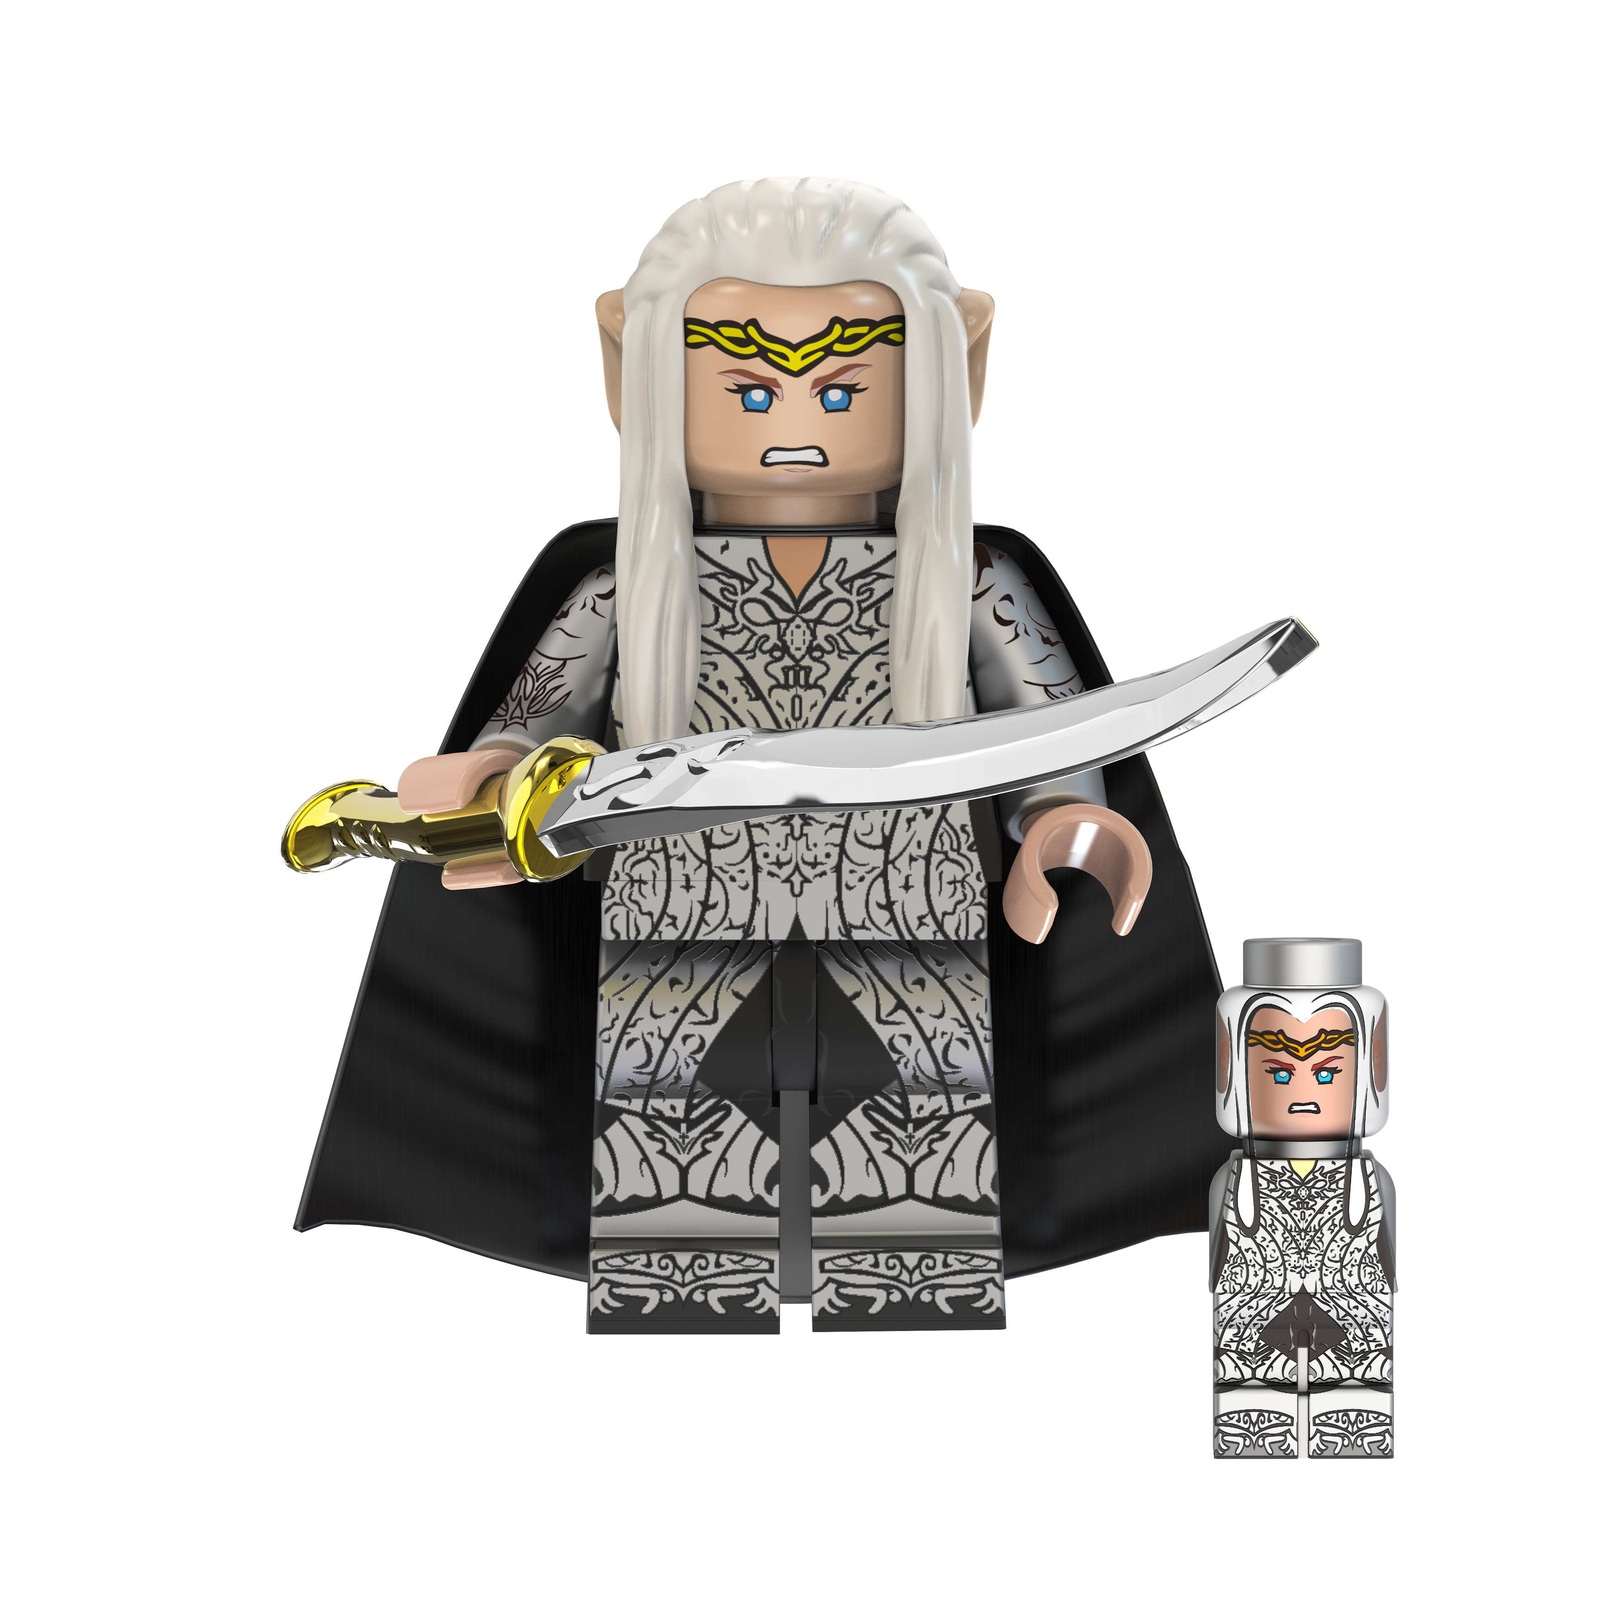 Primary image for King Thranduil The Hobbit The Lord of the Rings Minifigures Building Toy